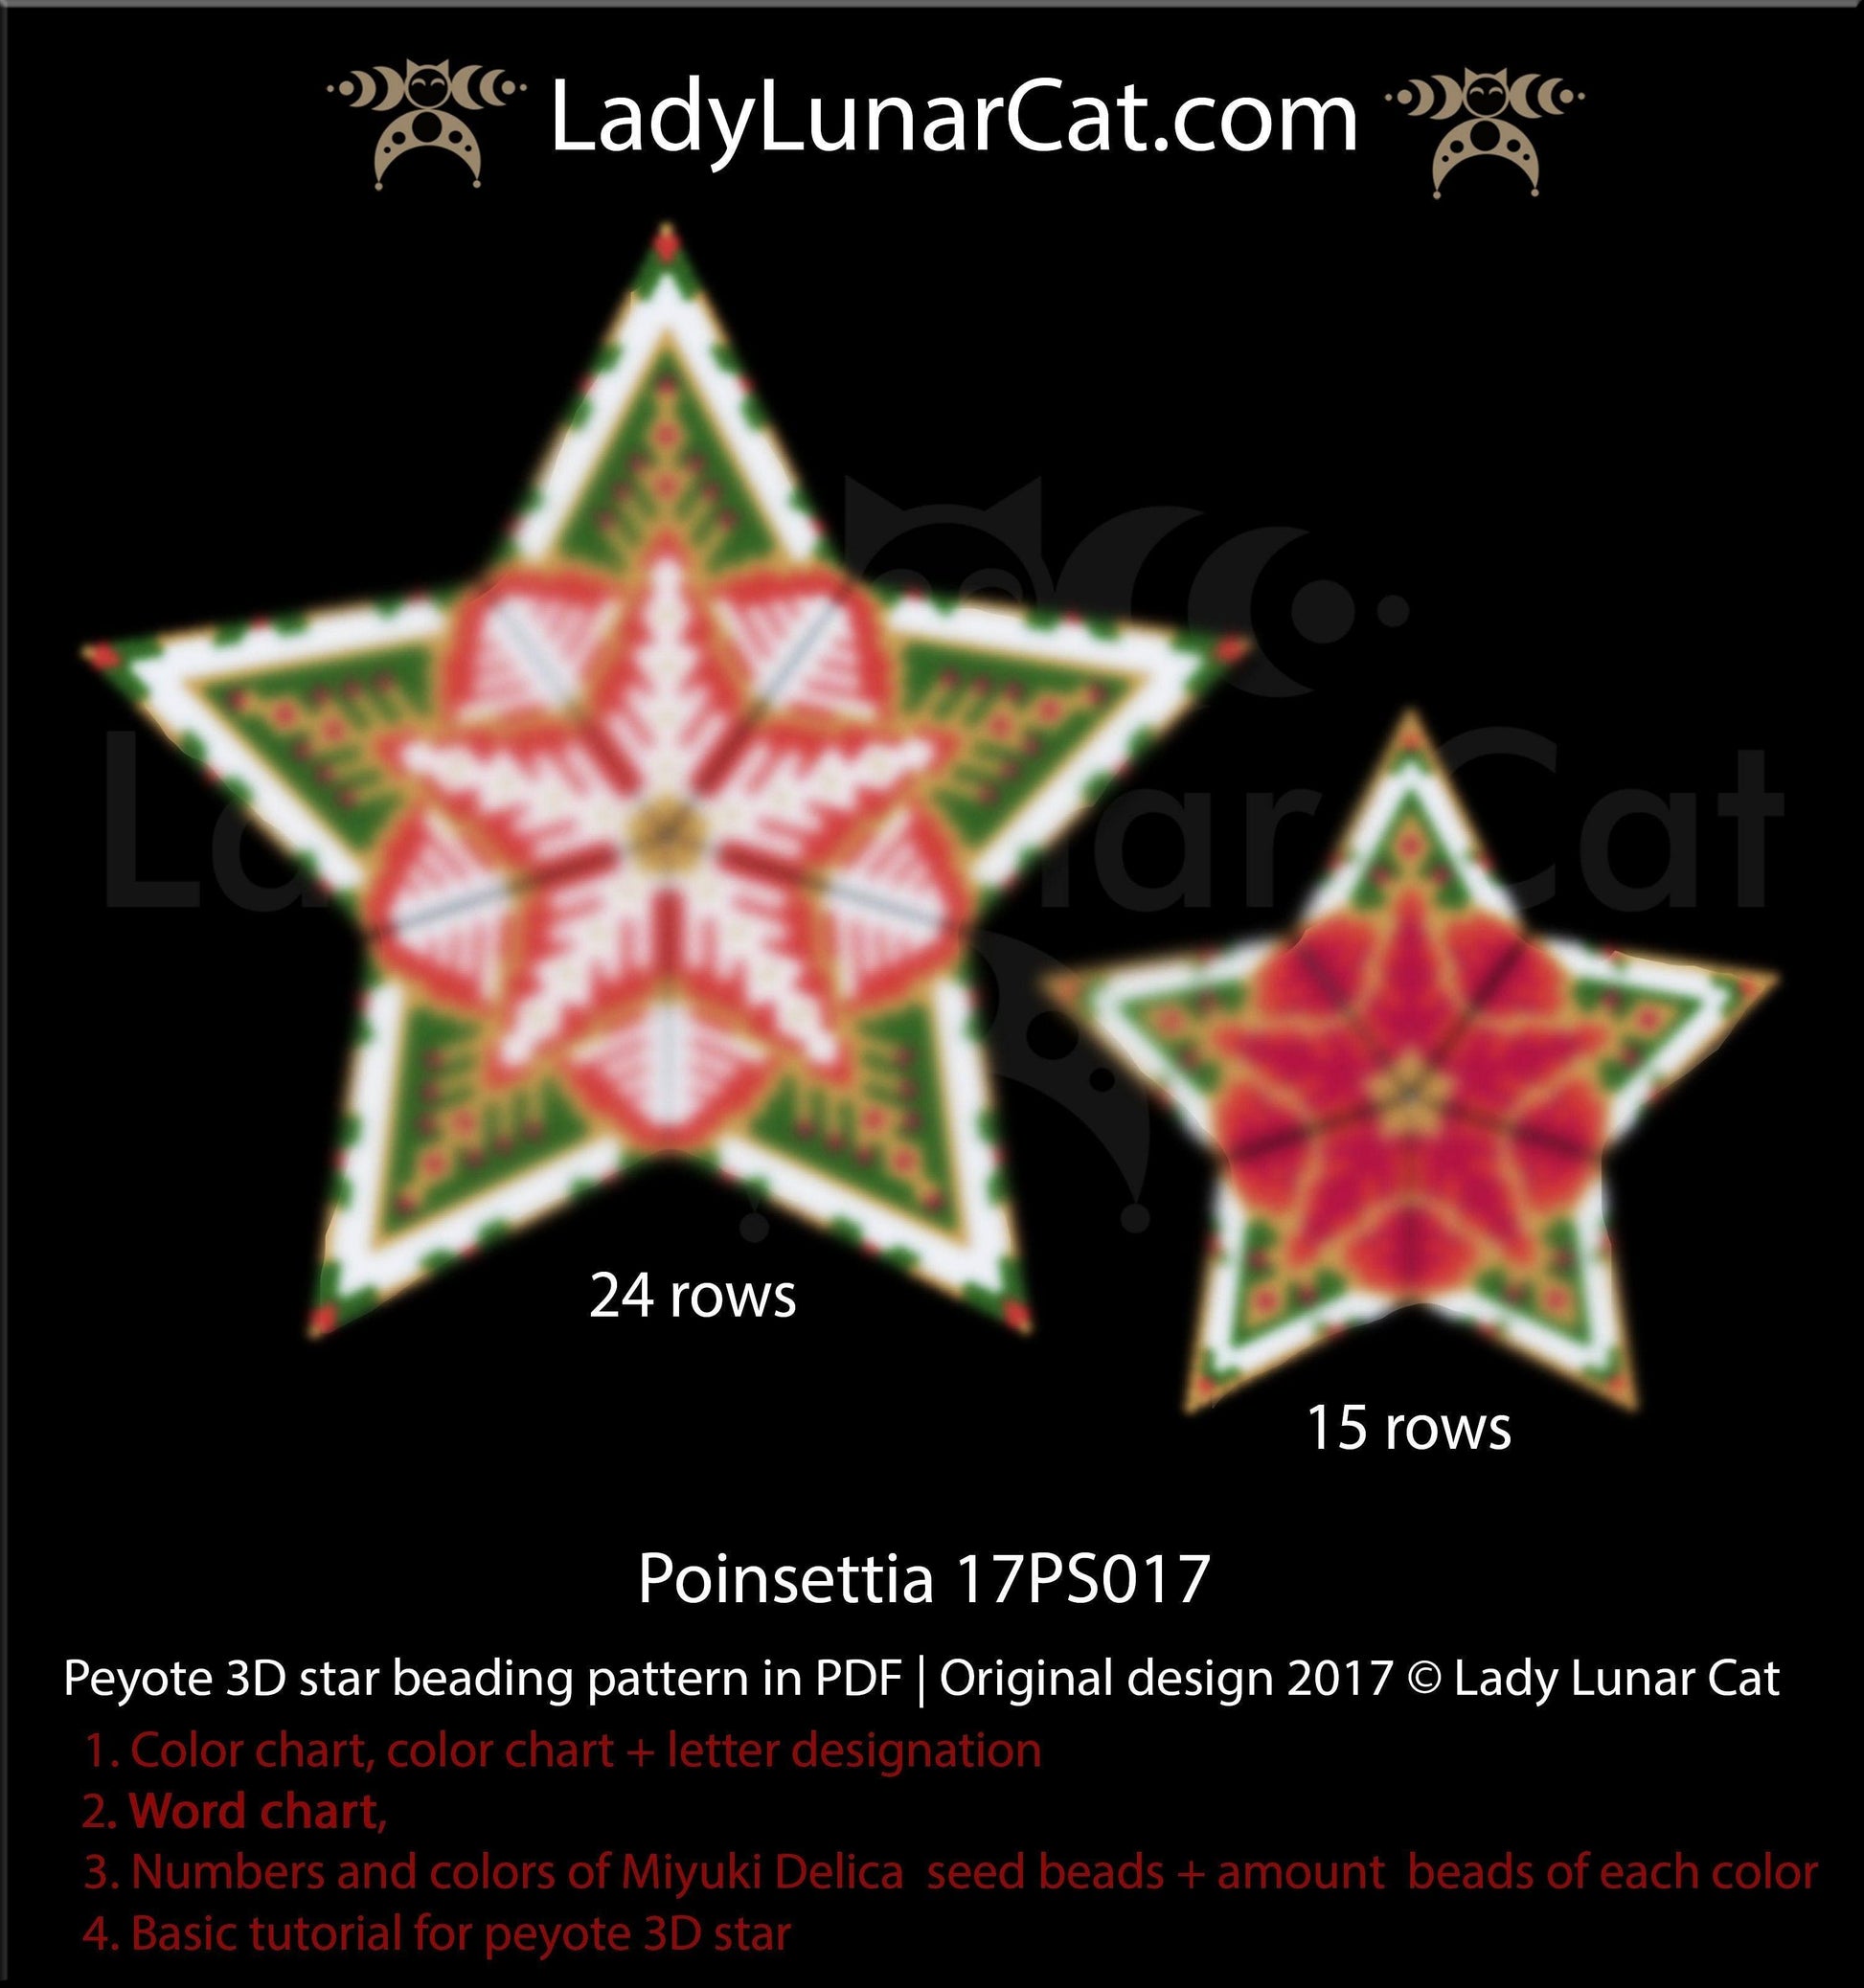 3d peyote star patterns for beading Poinsettia 17PS017 LadyLunarCat